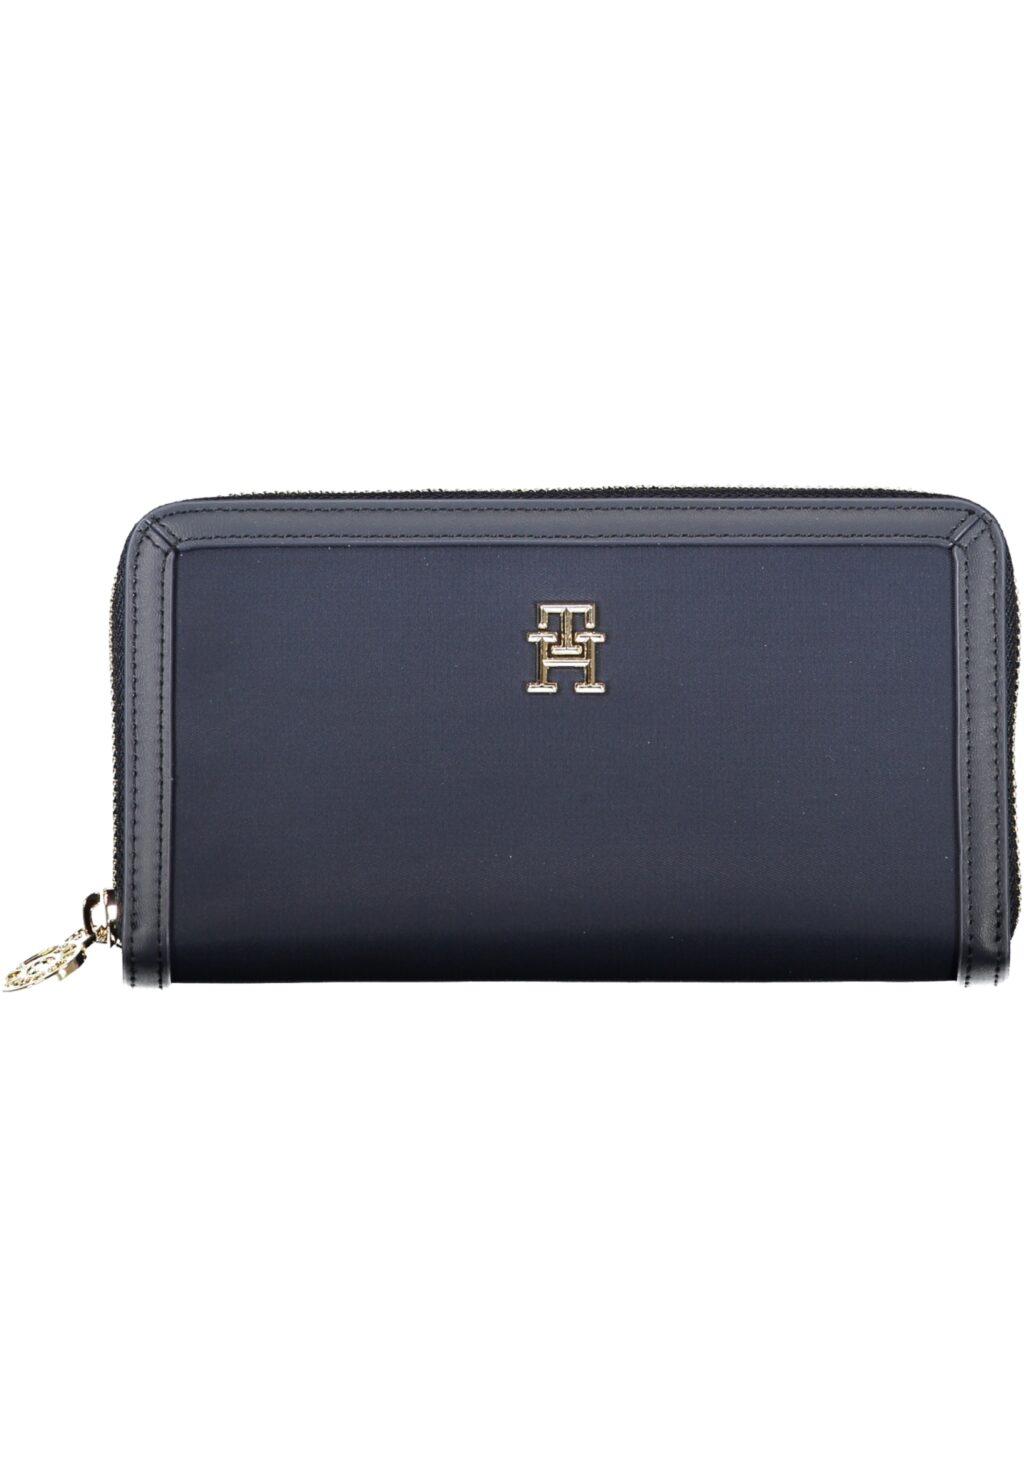 TOMMY HILFIGER WOMEN'S WALLET BLUE AW0AW15749_BLDW6